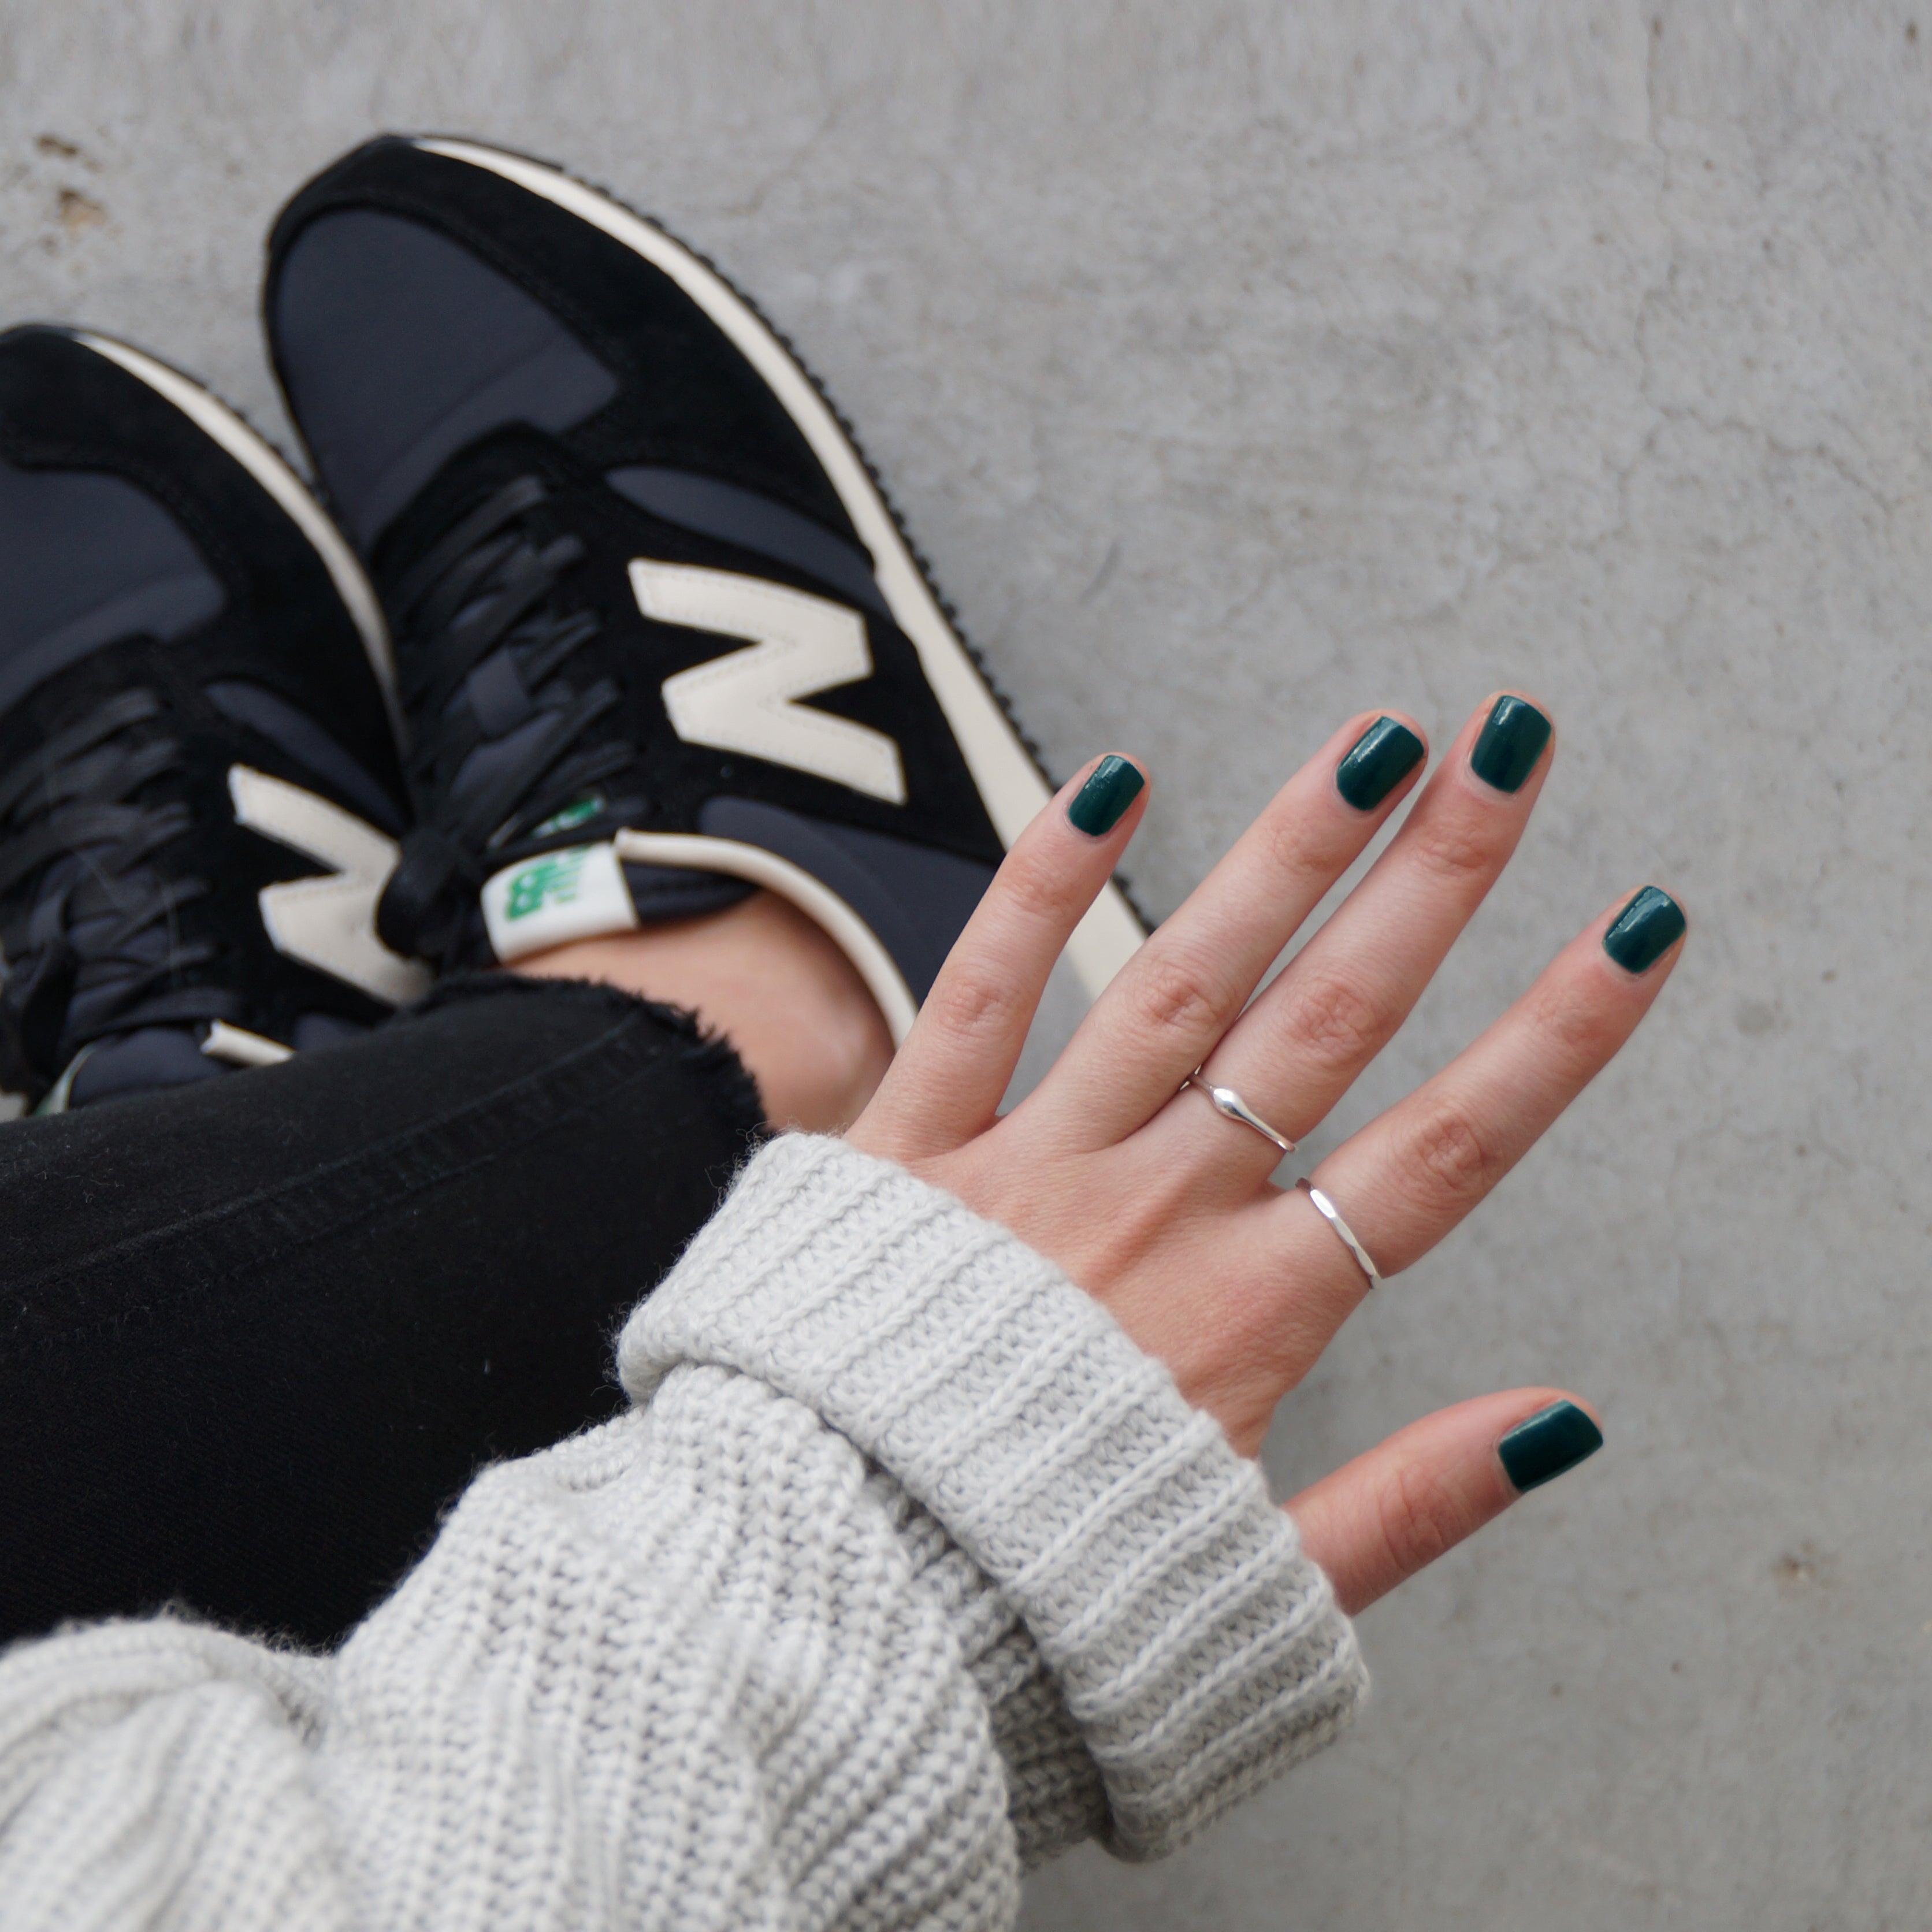 A female holding out her hand, wearing Sea Queen, a dark green nail polish. Contrasting against her black jeansm New Balance shoes, and light grey concrete in the background.